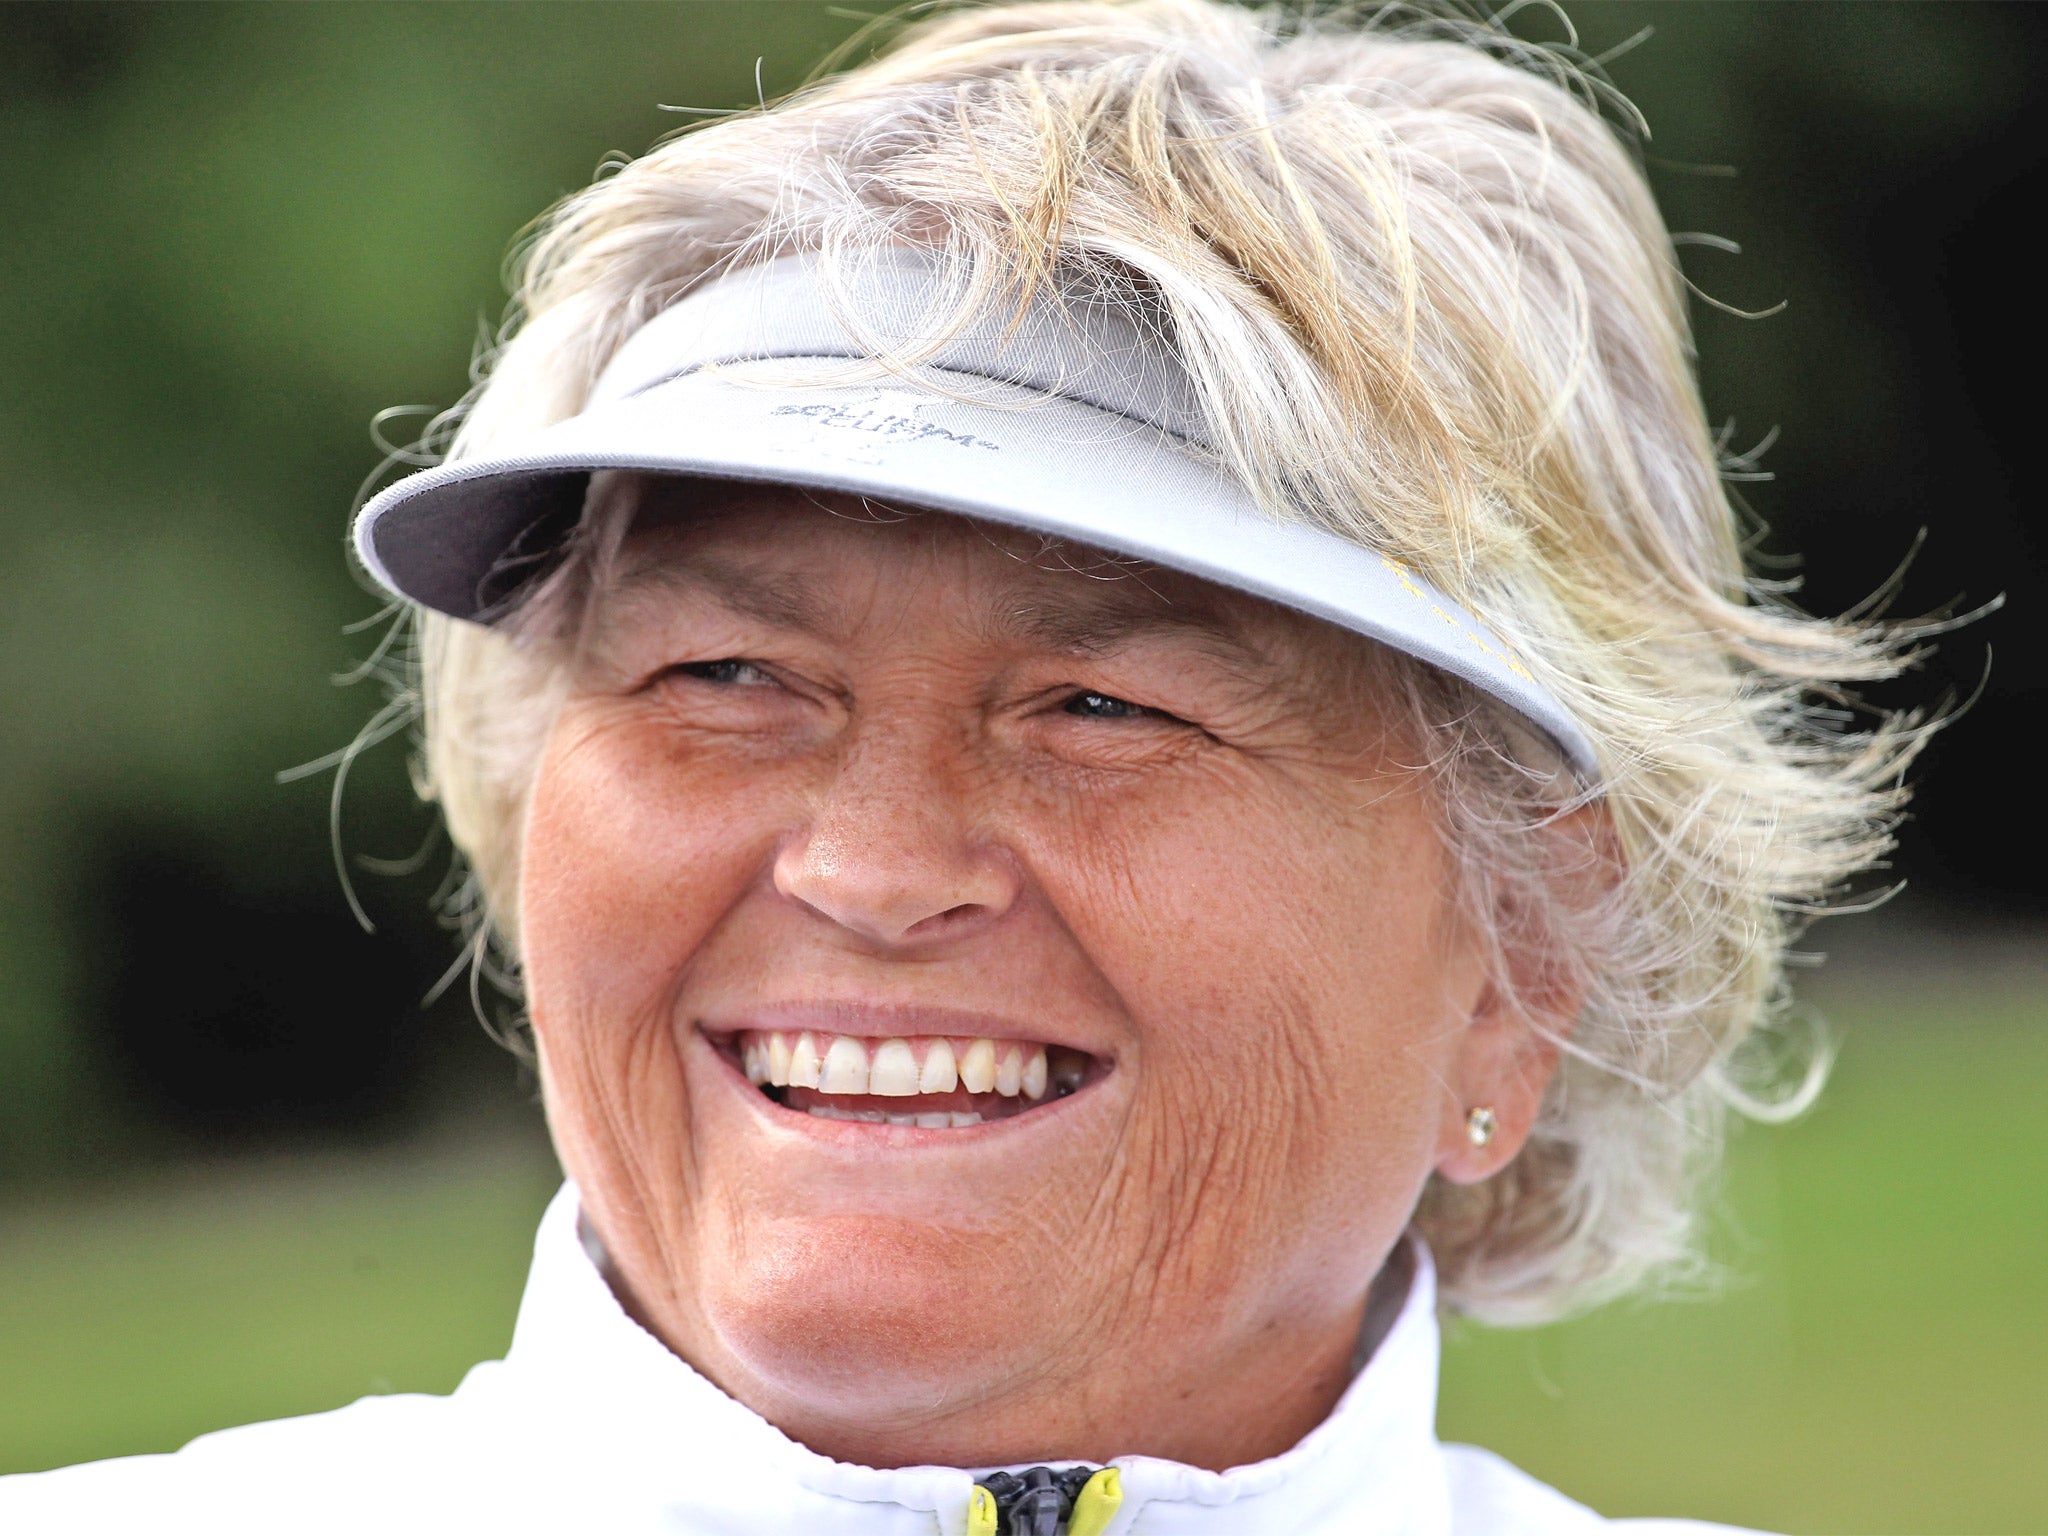 Laura Davies: 'Right now, my only thought on the first tee at the start of a tournament is winning'